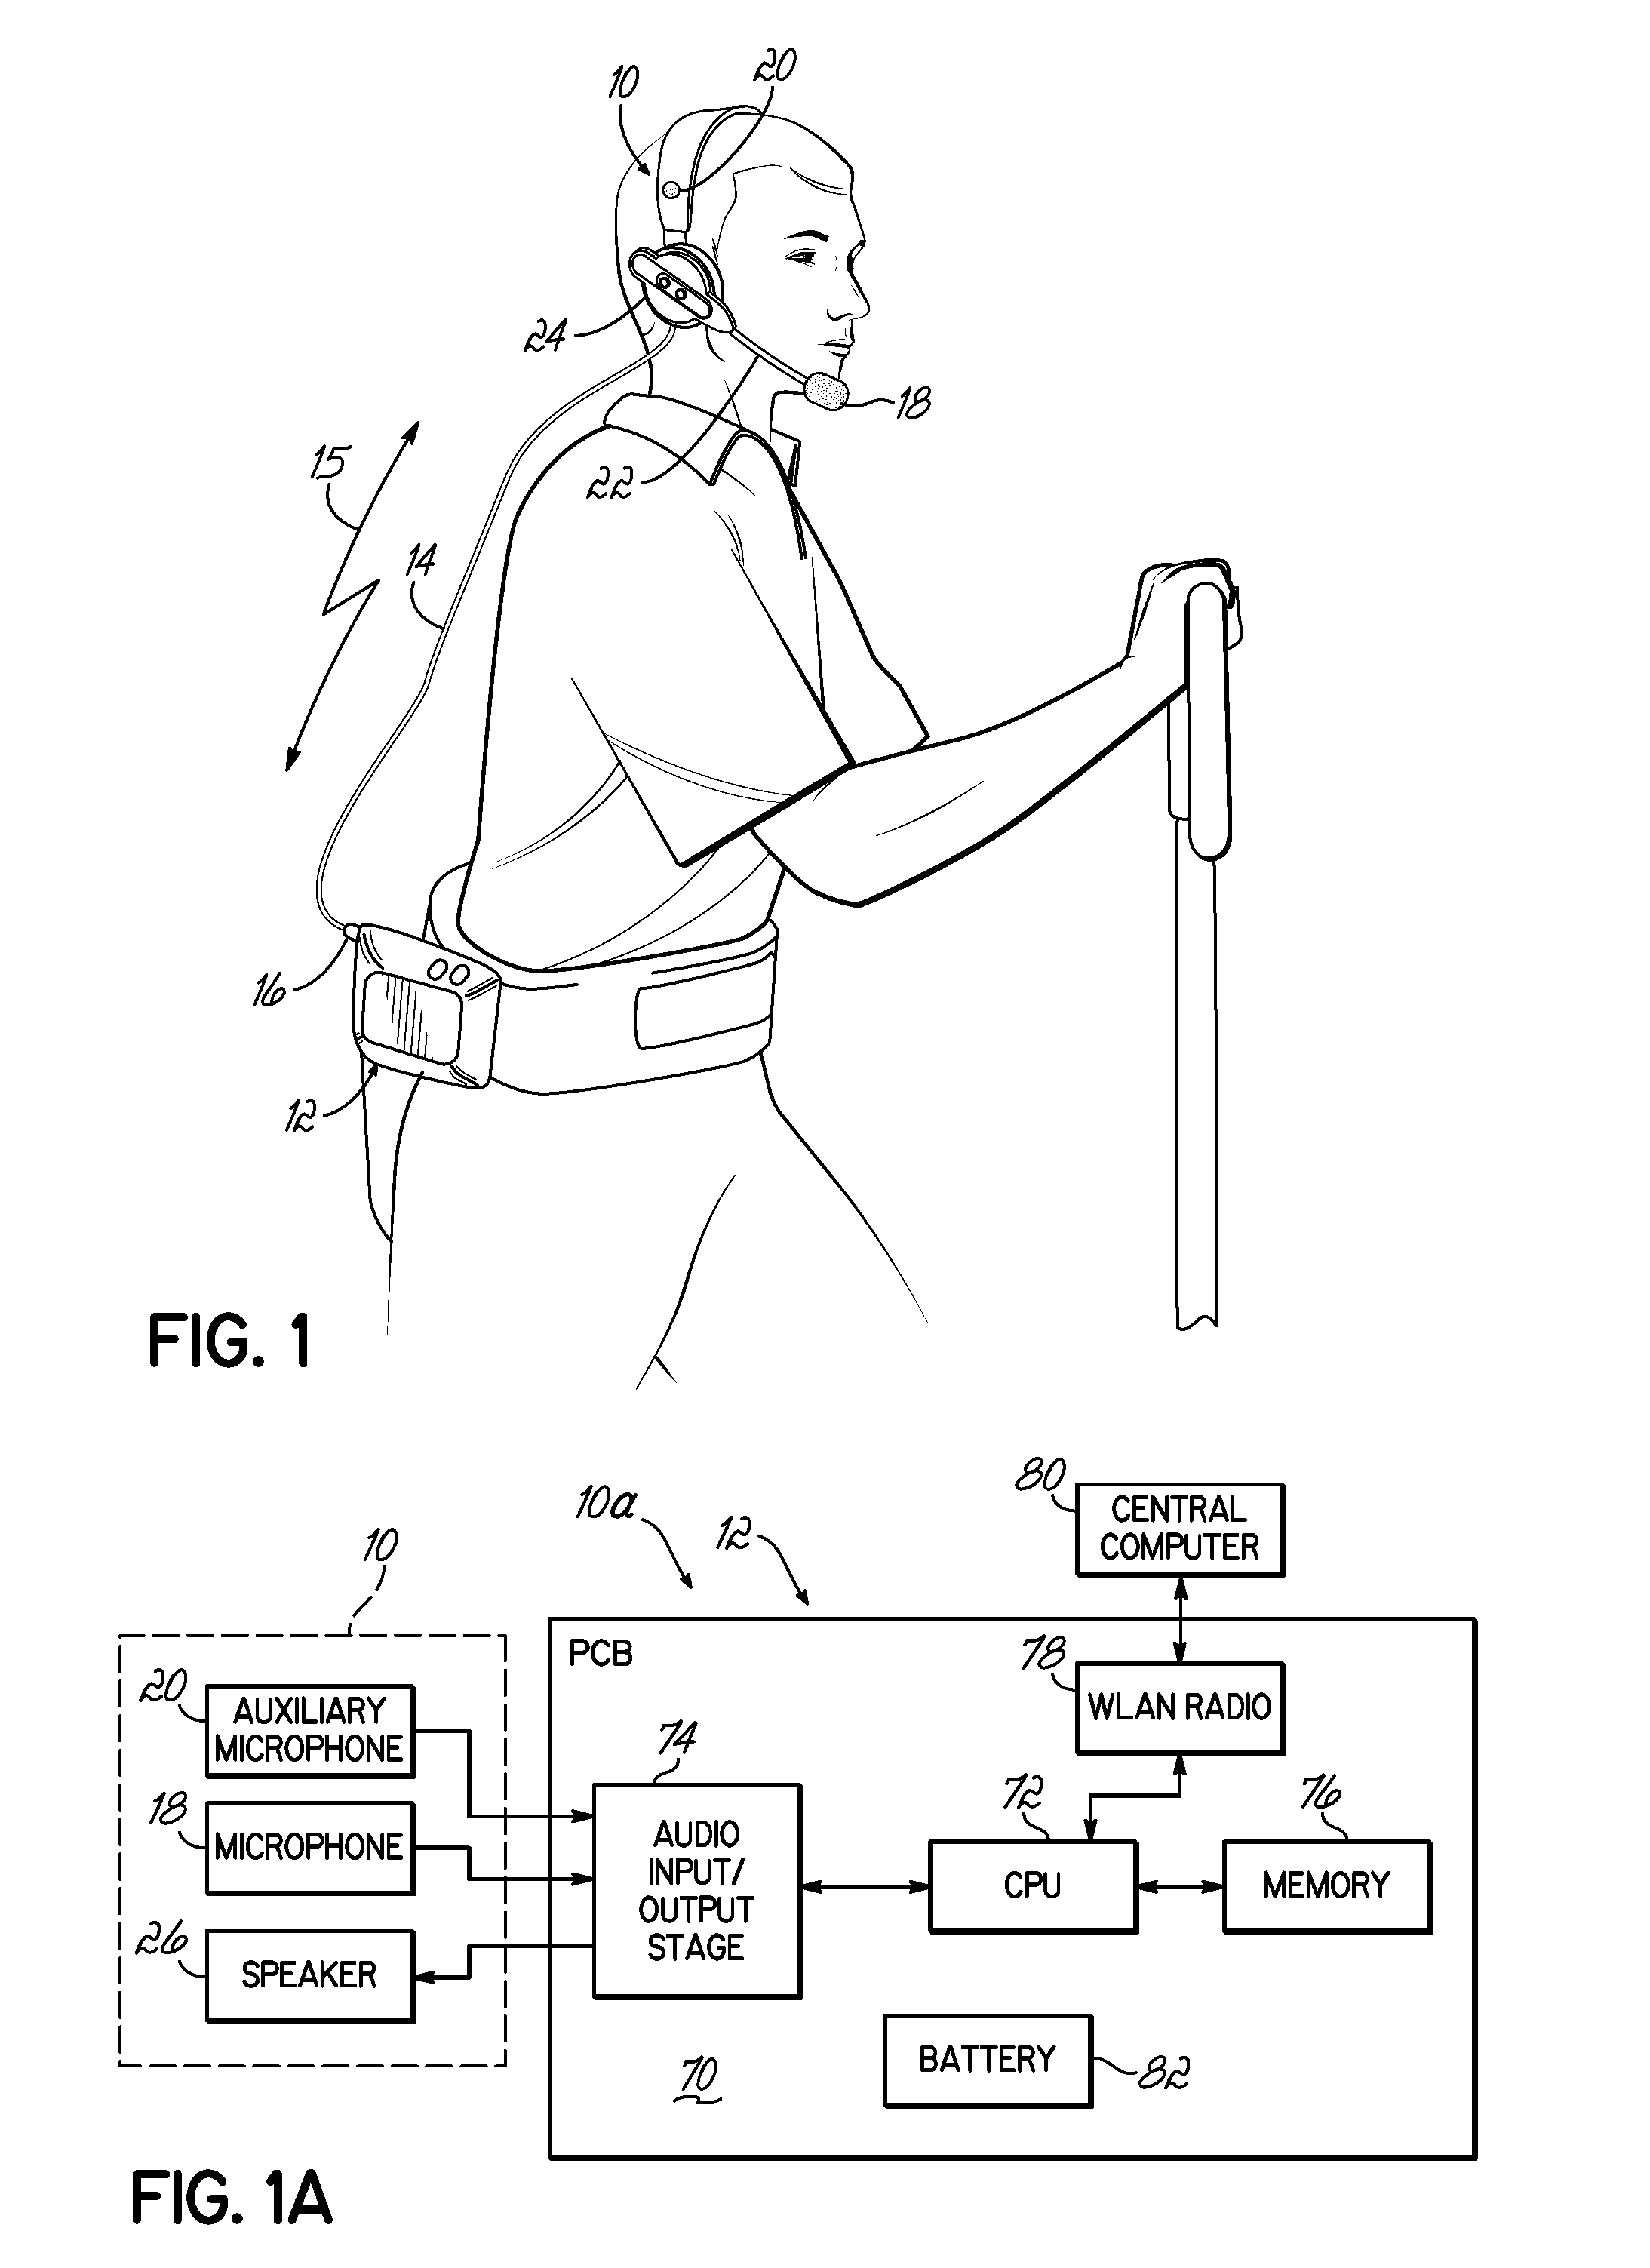 System and method for improving speech recognition accuracy in a work environment